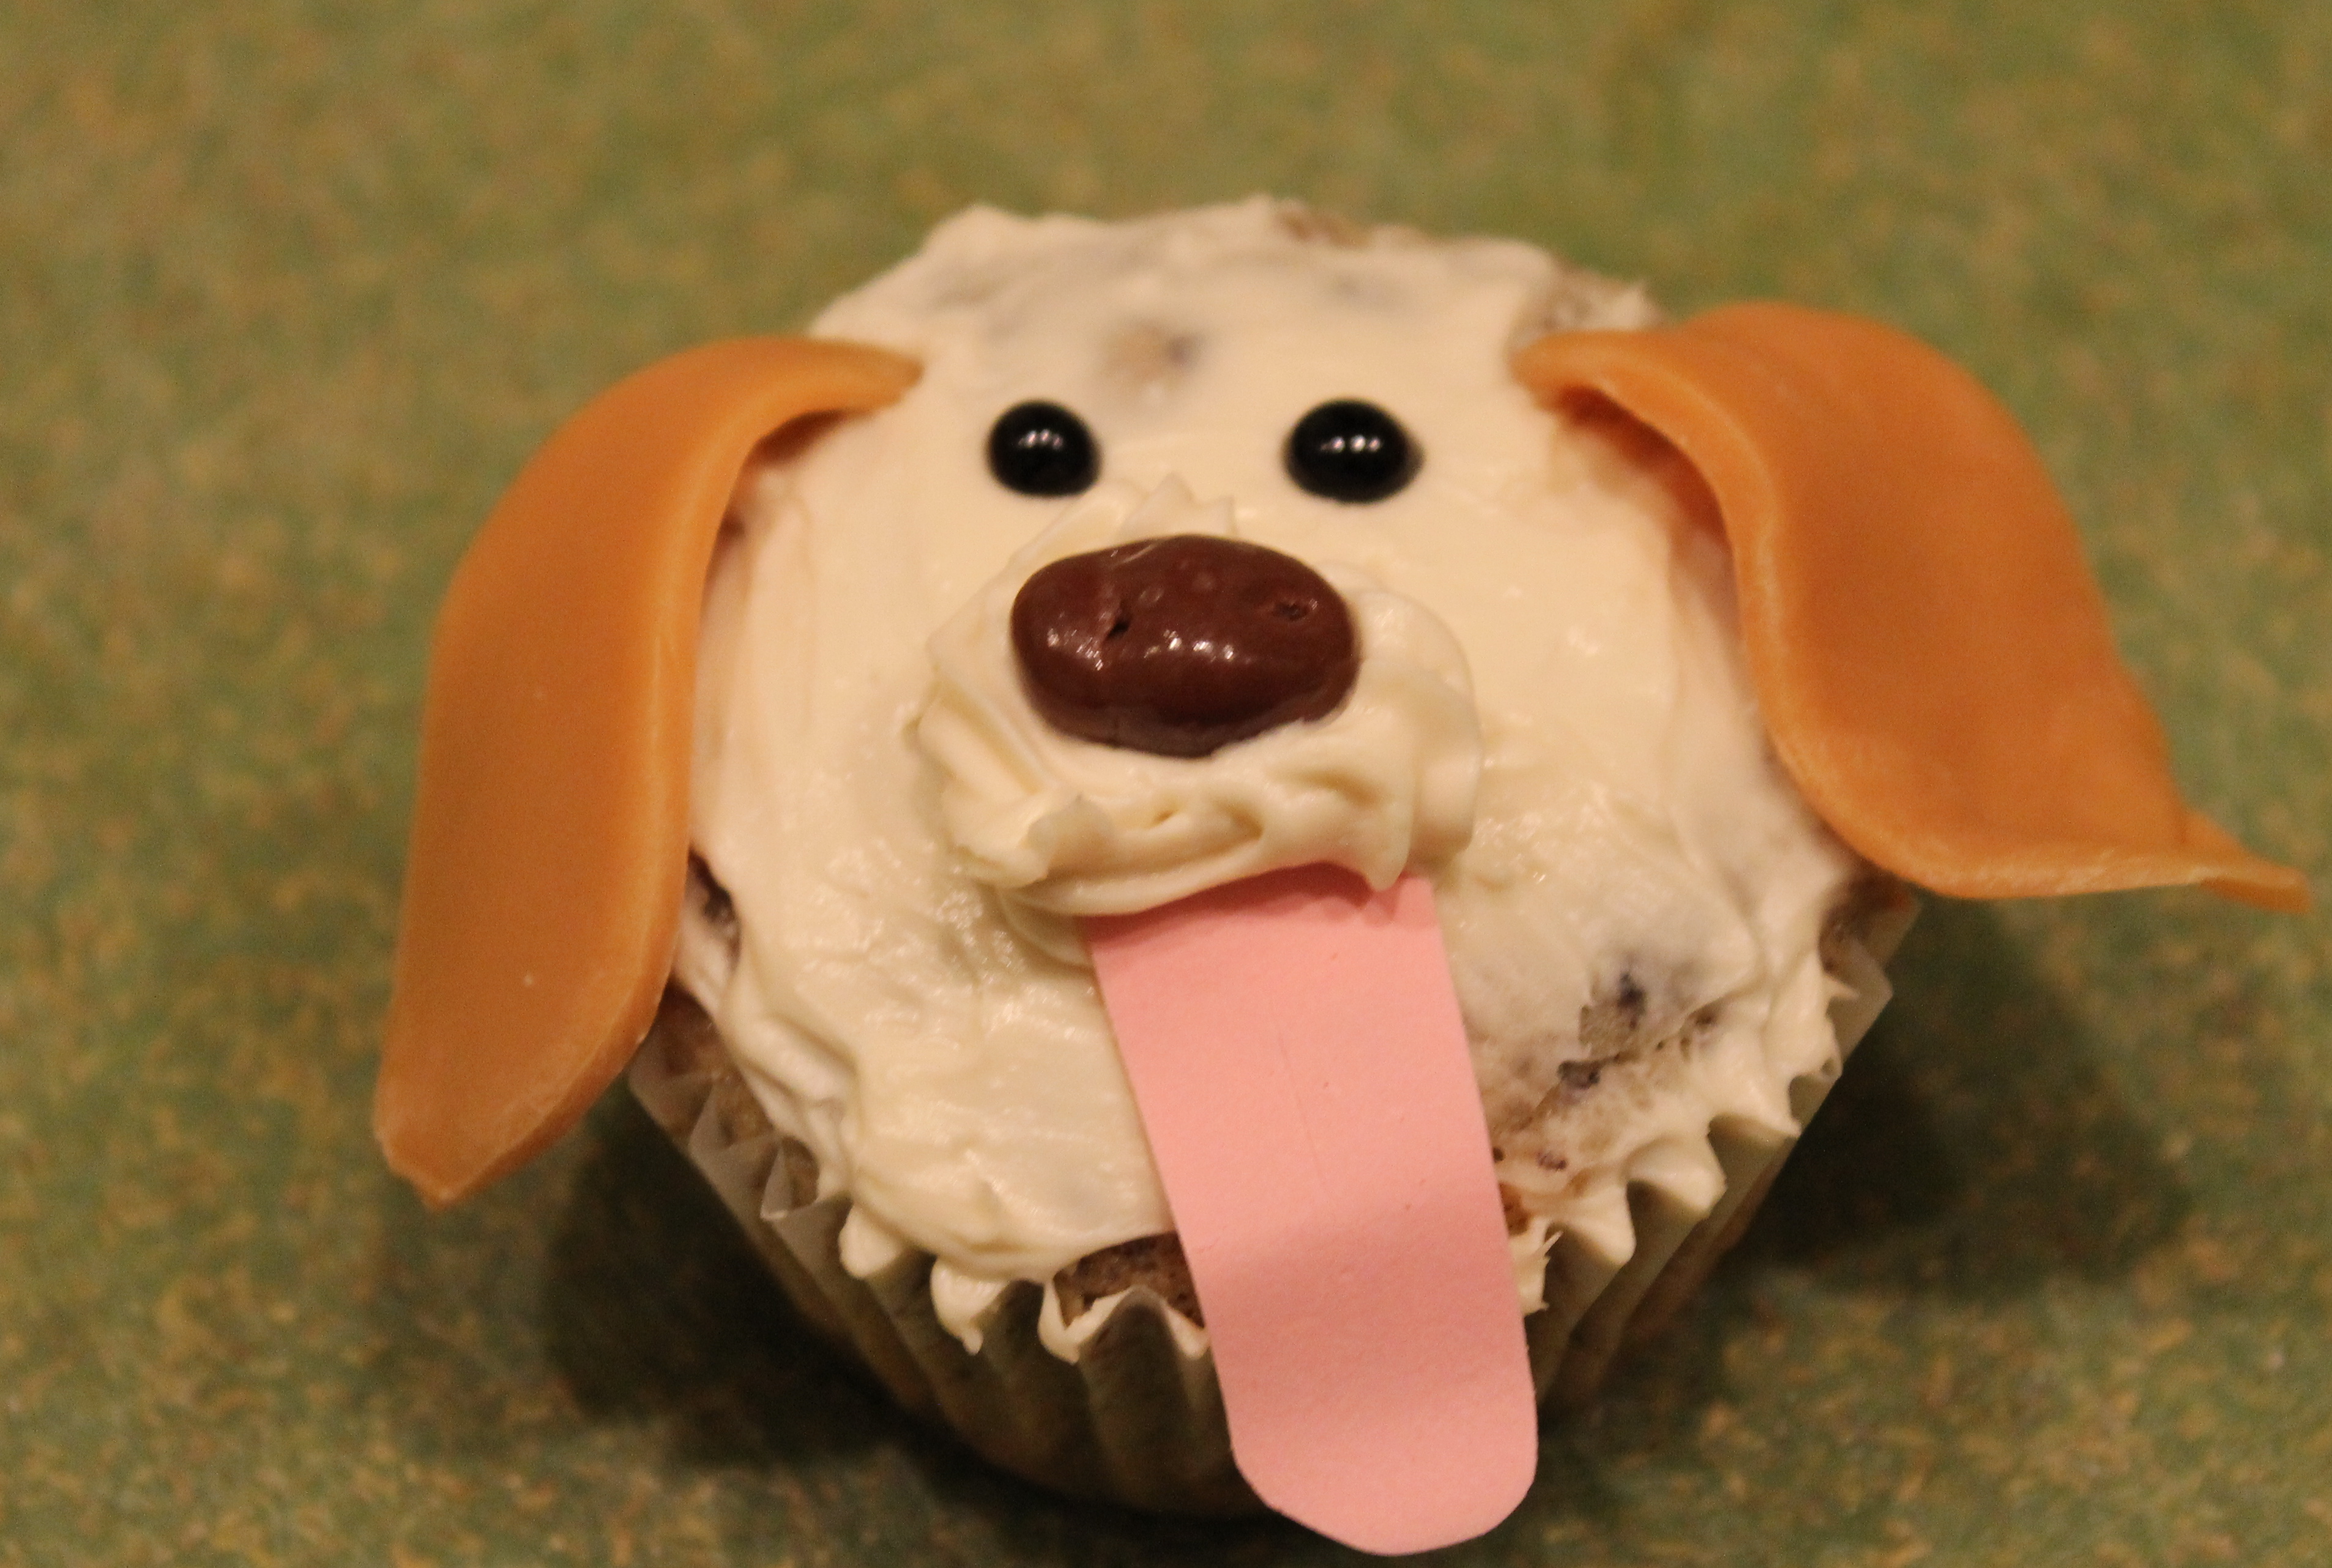 Cupcake finished - Adorable Puppy Cupcakes